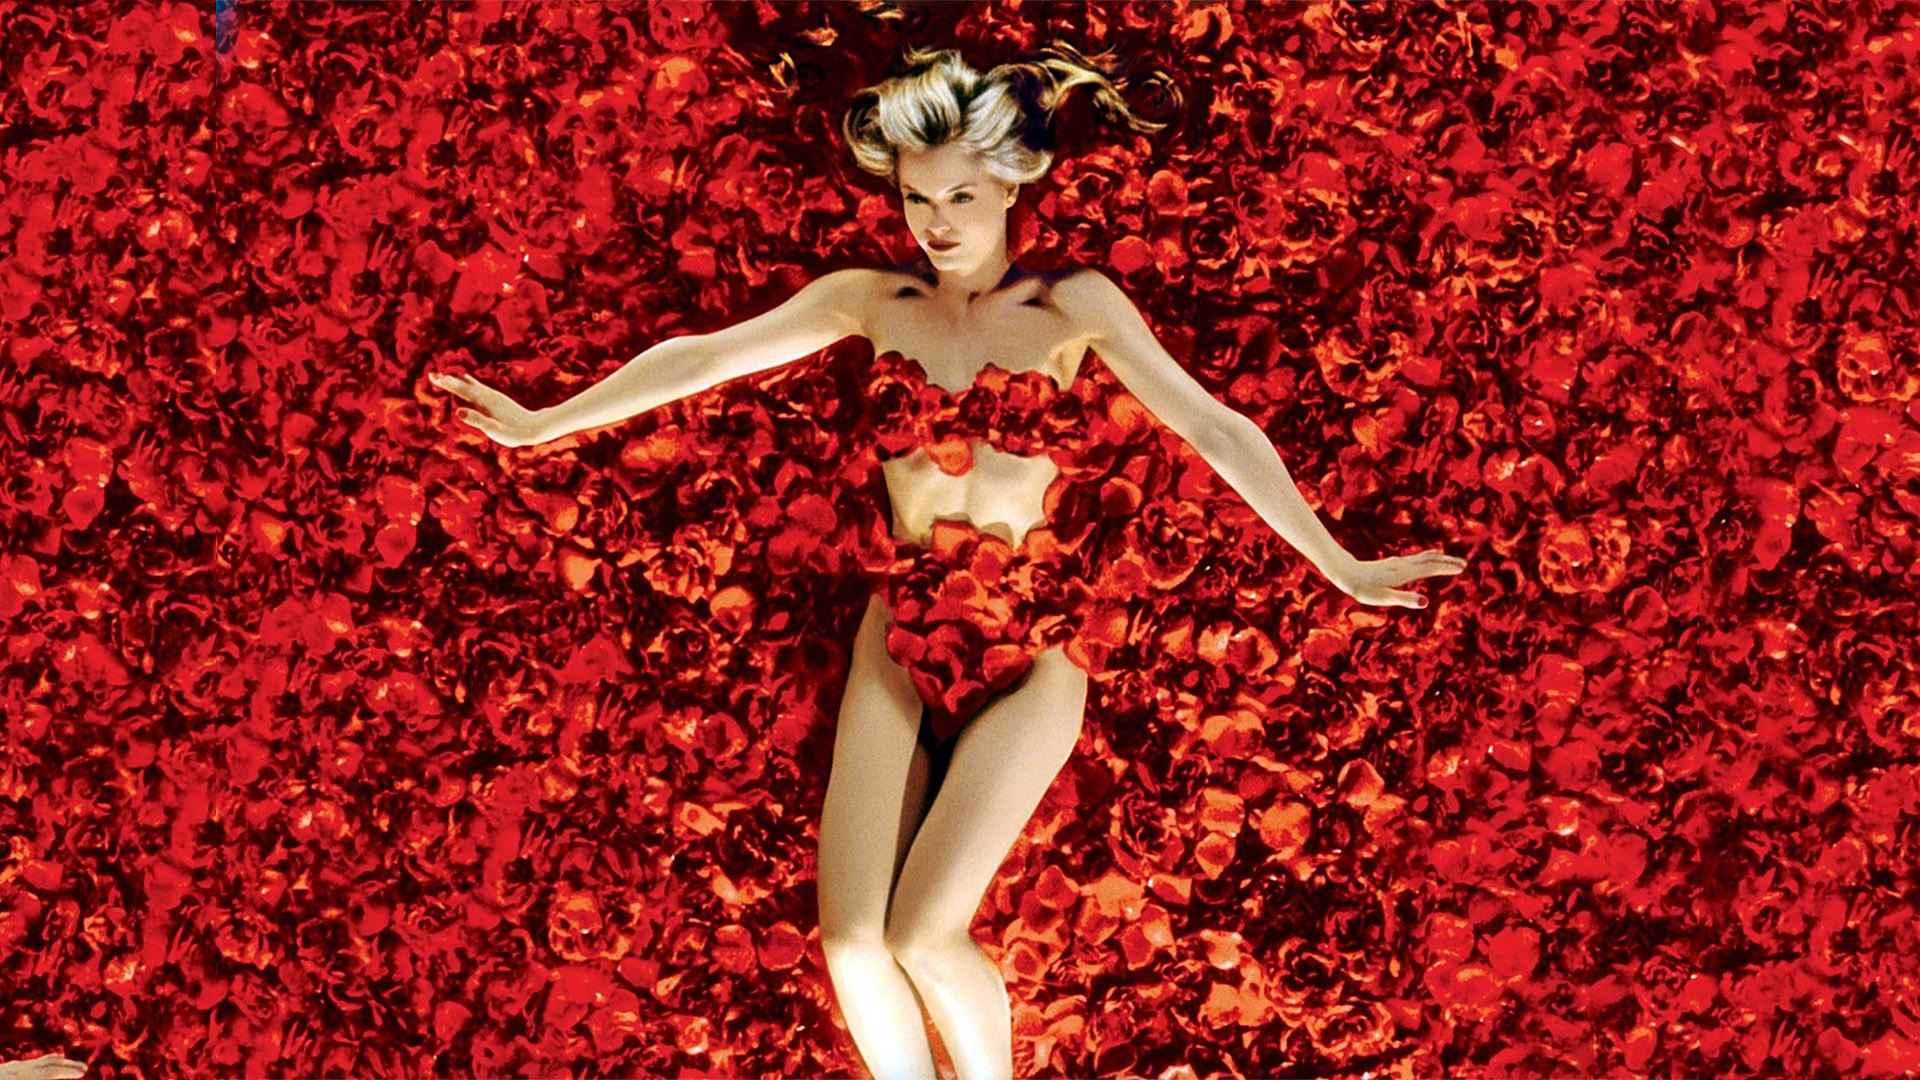 How Many of These Classic 90s Movies Can You Identify from Just One Image? American Beauty 1999